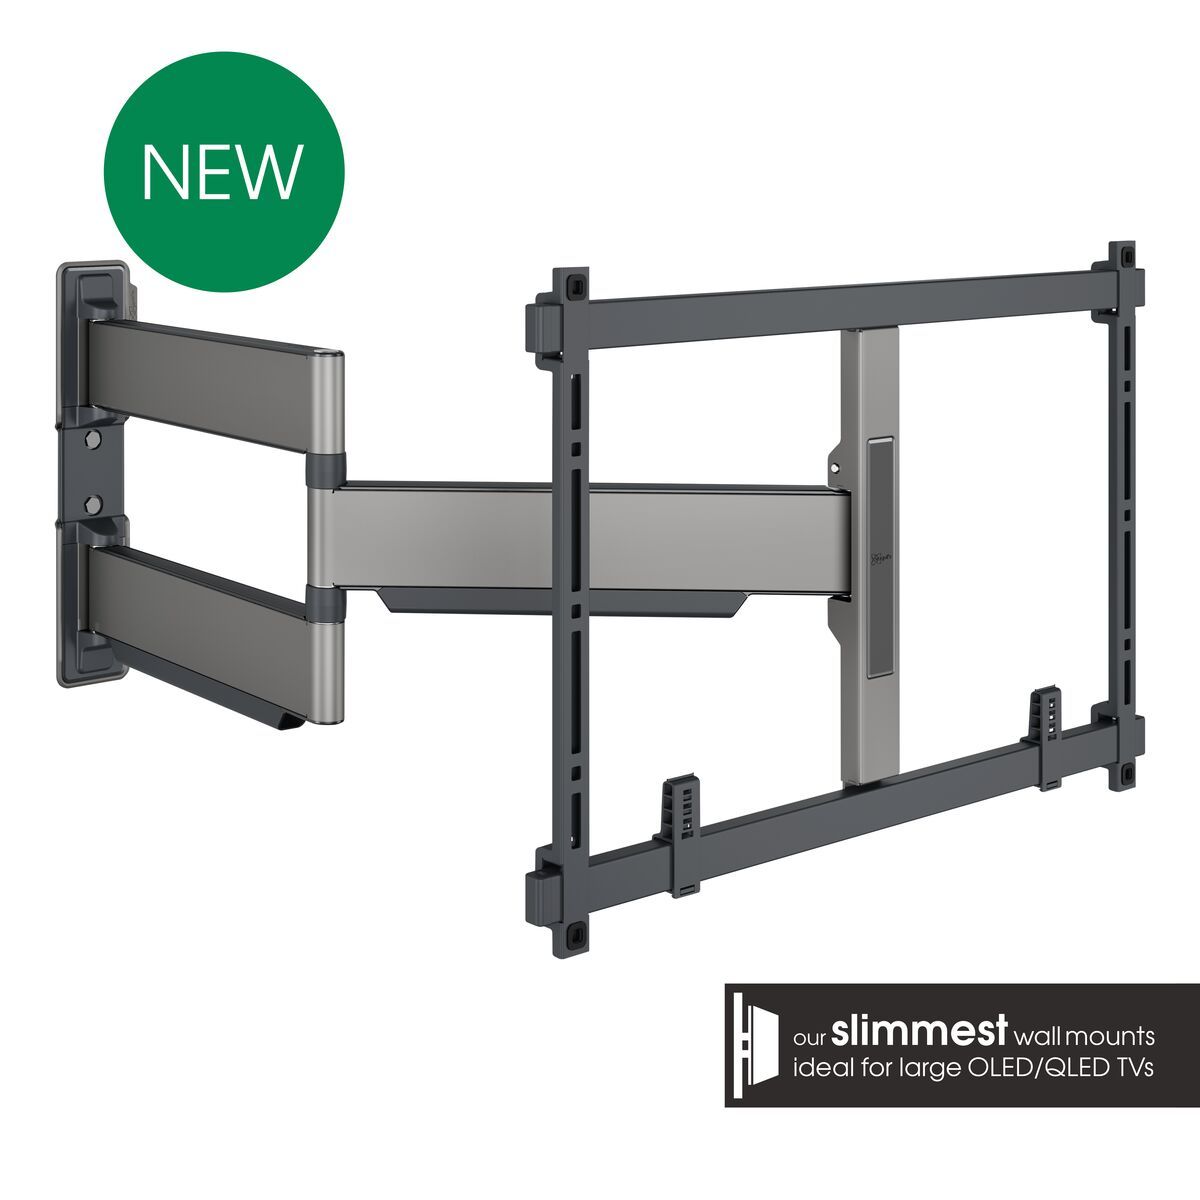 Vogel's TVM 5845 Full-Motion TV Wall Mount - Suitable for 55 up to 100 inch TVs - Full motion (up to 180°) swivel - Promo